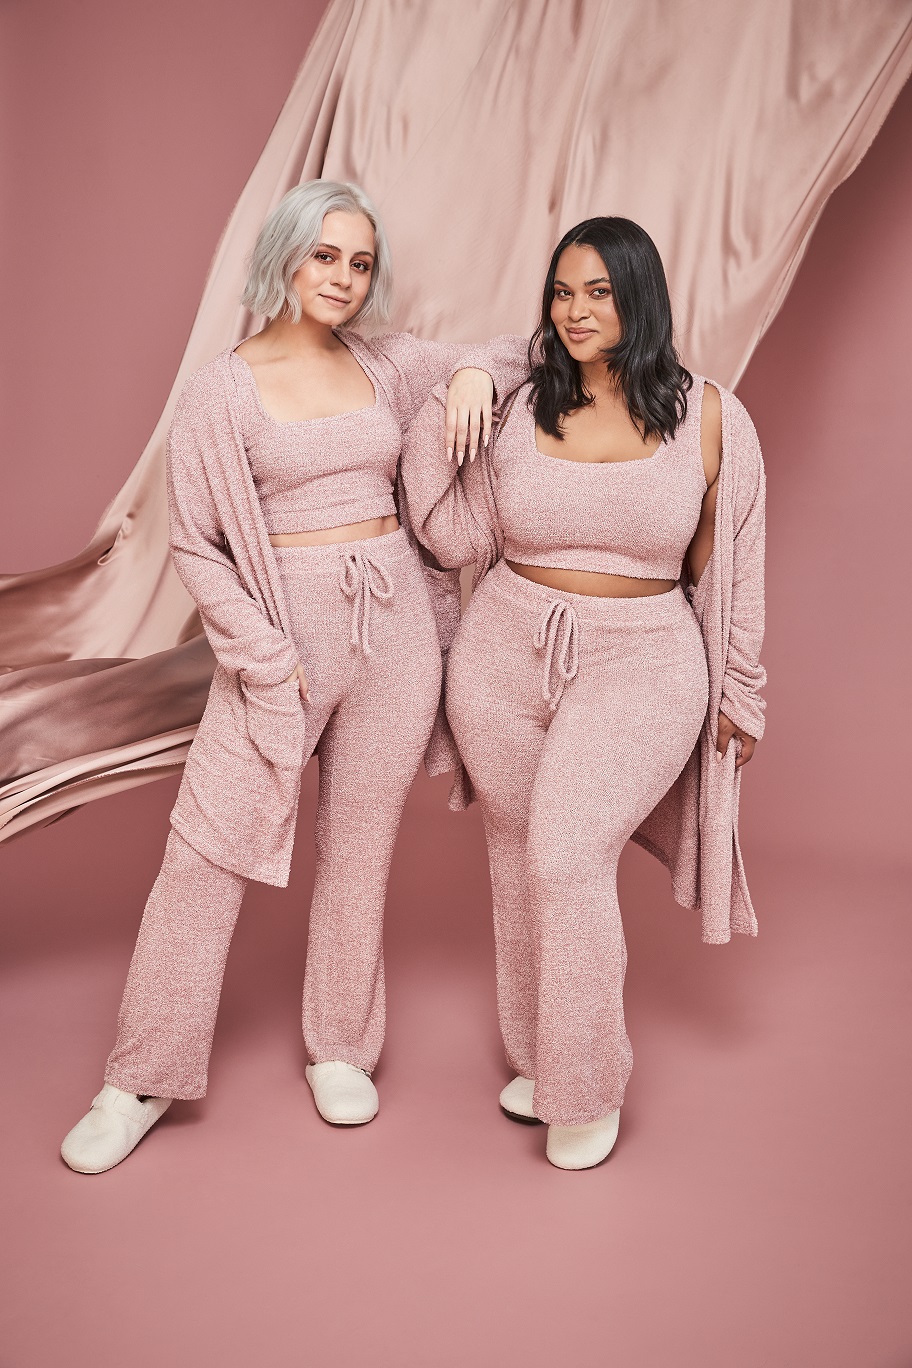 It's About 'Style Not Size' Launches at Macy's – GAZELLE MAGAZINE